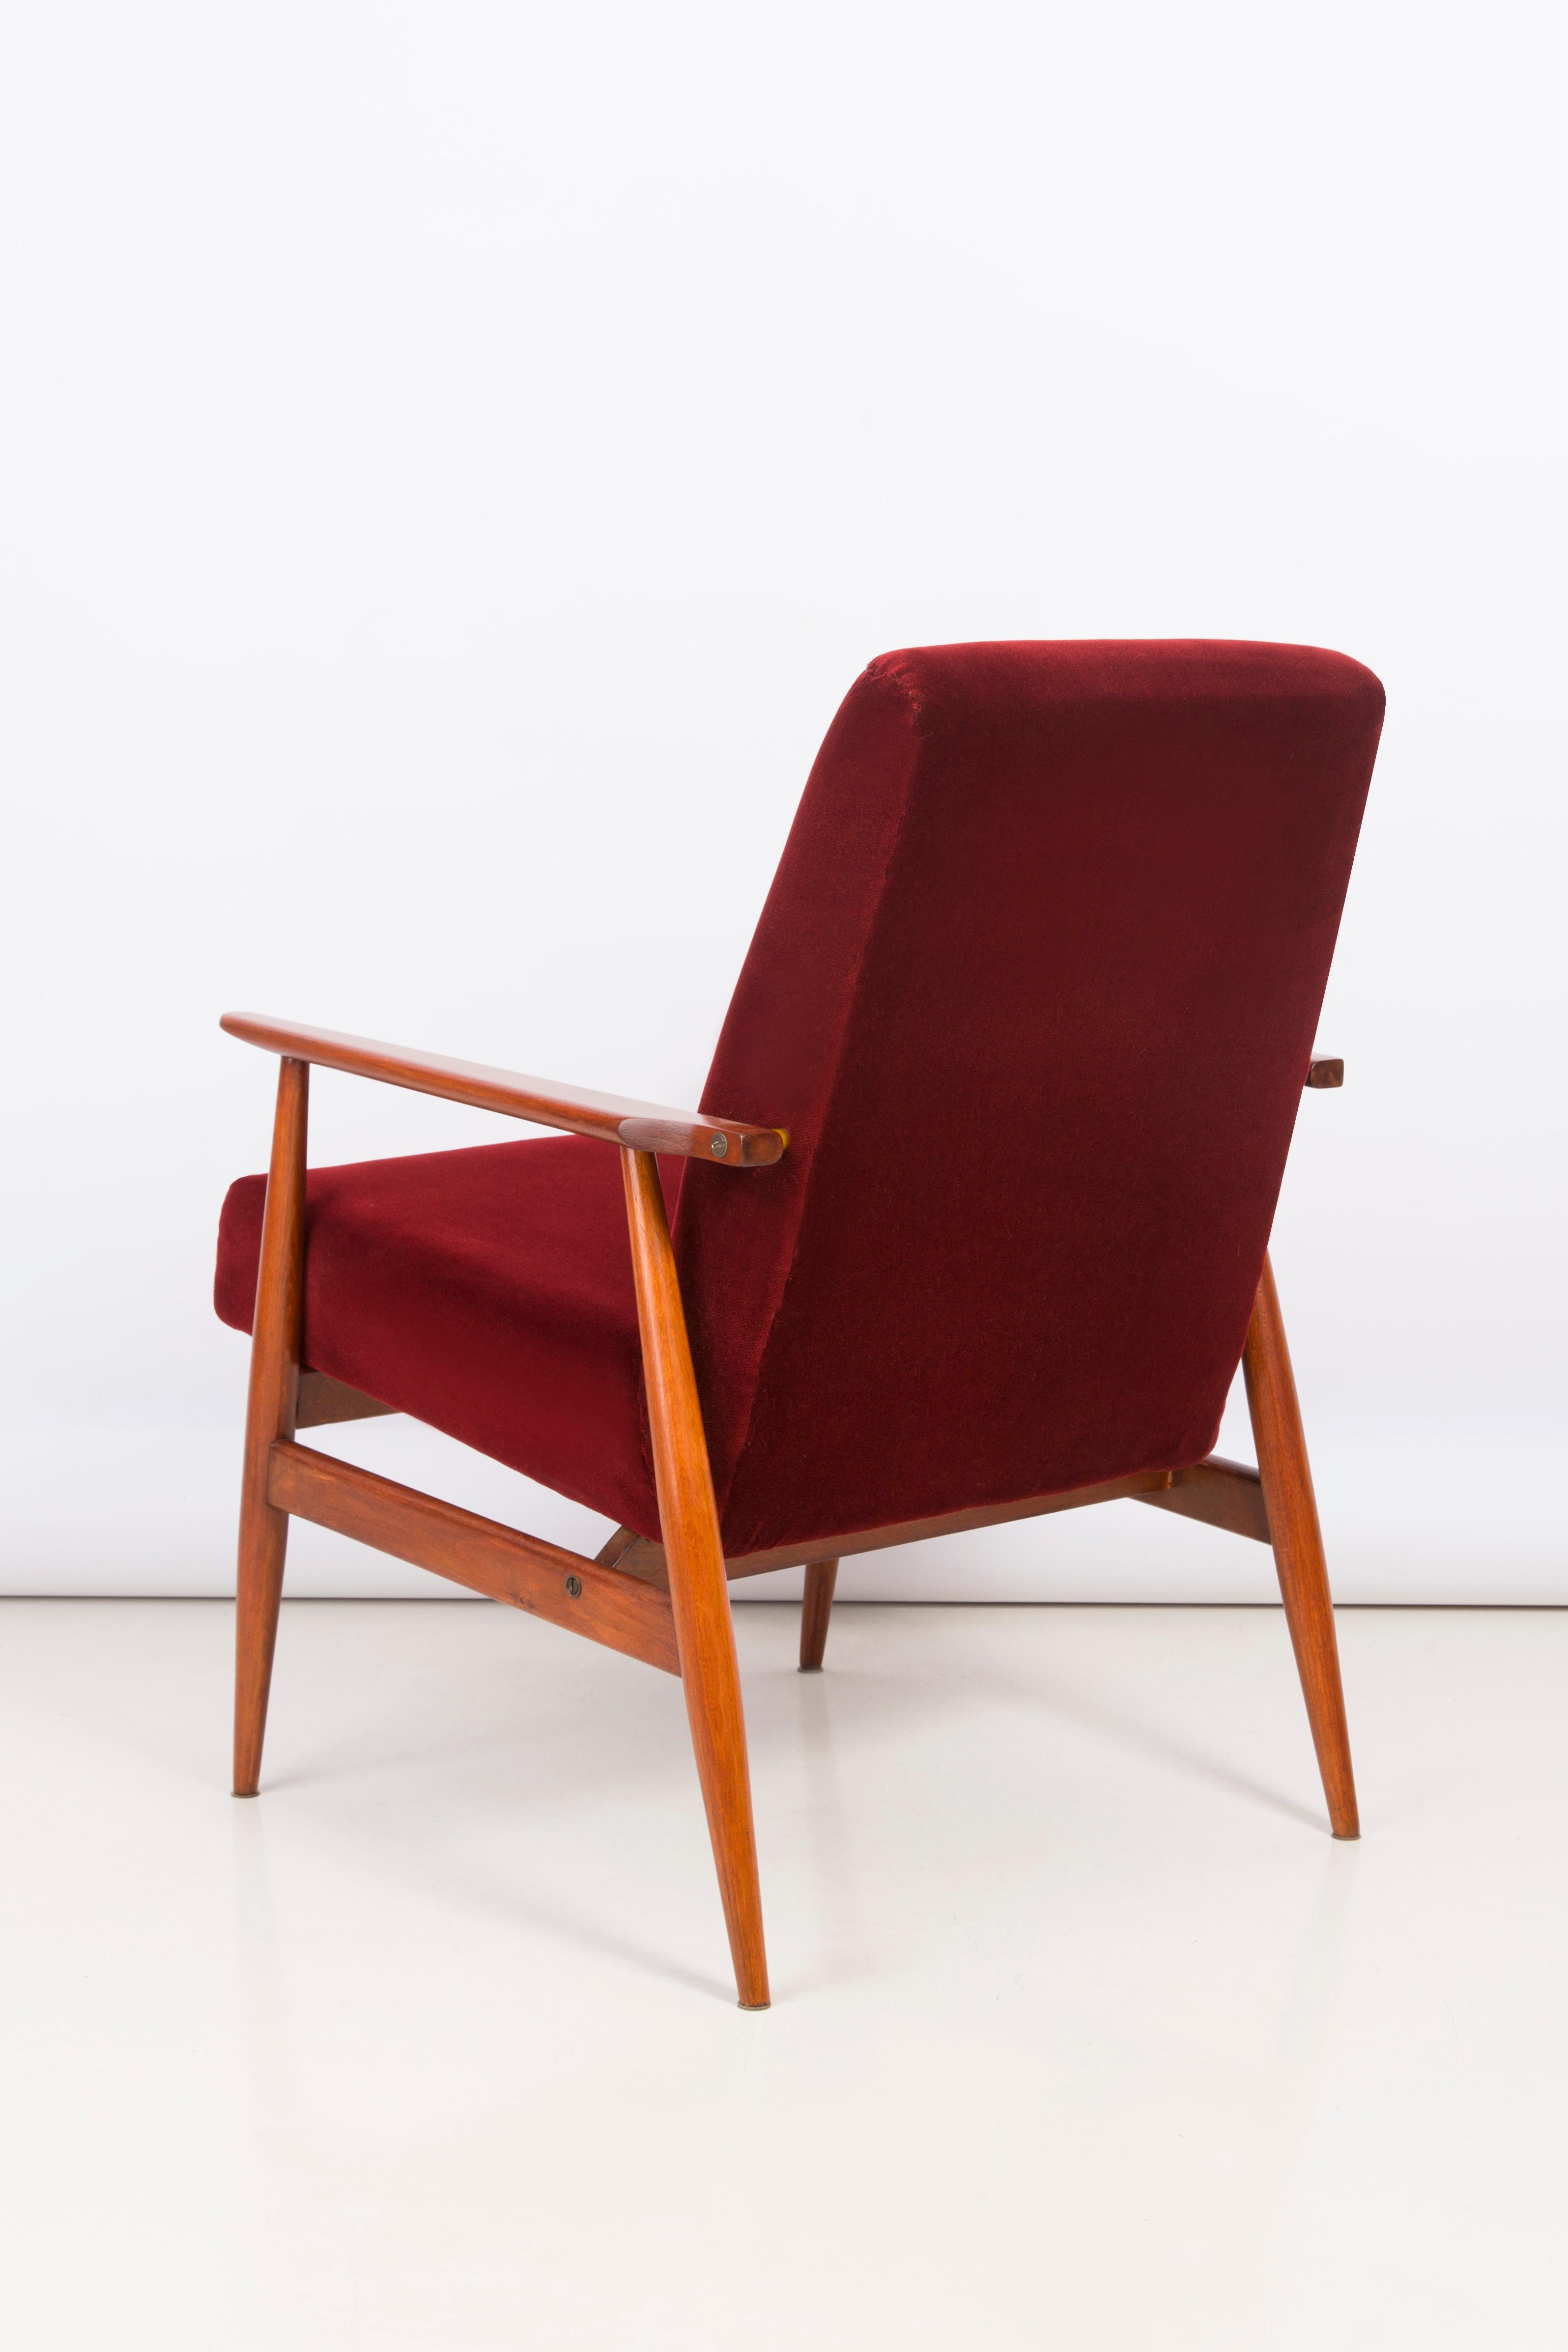 Set of Two 20th Century Burgundy Dark Red Dante Armchairs, H. Lis, 1960s For Sale 3